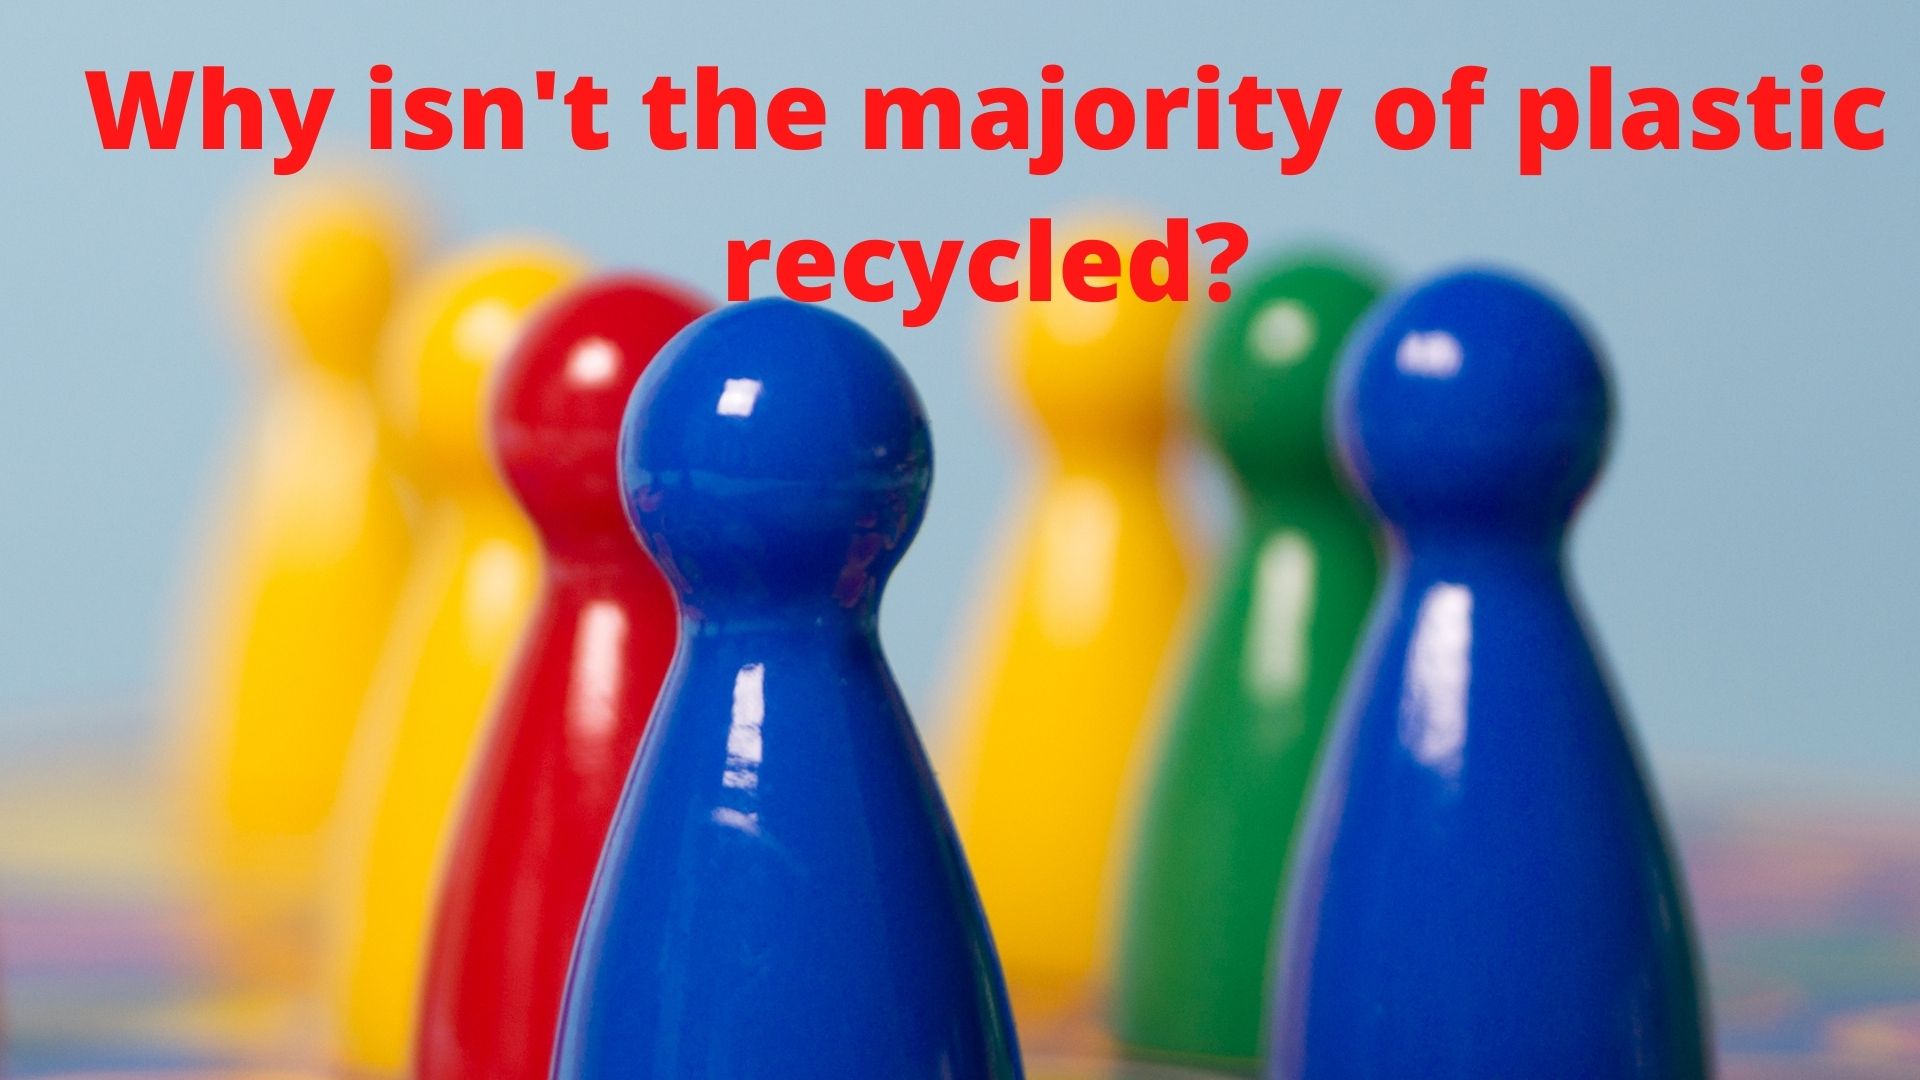 Why isn't the majority of plastic recycled?